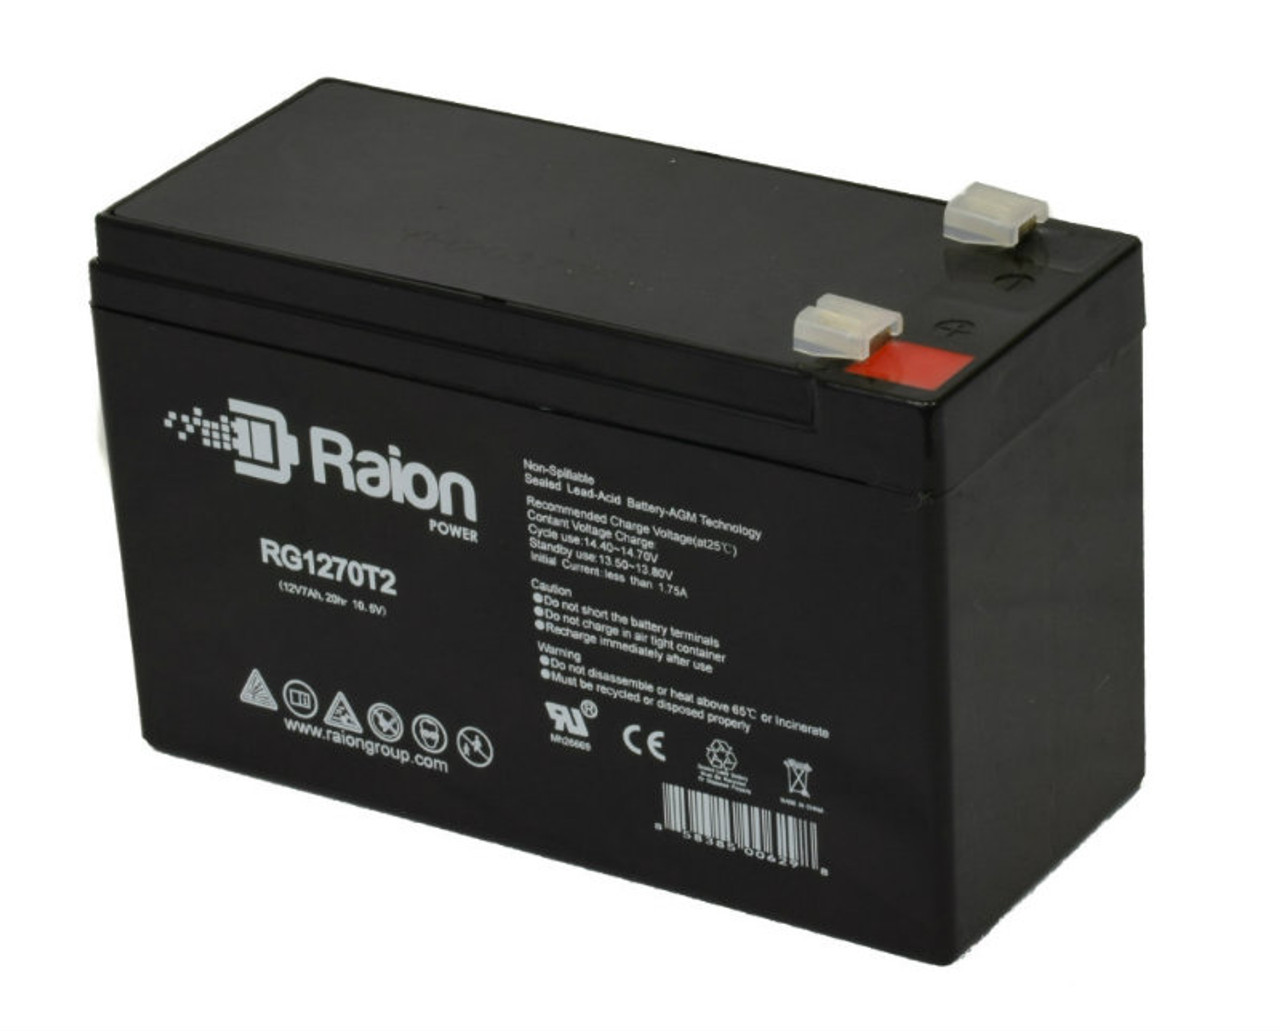 Raion Power RG1270T1 12V 7Ah Non-Spillable Replacement Battery for Long Way LW-6FM7S